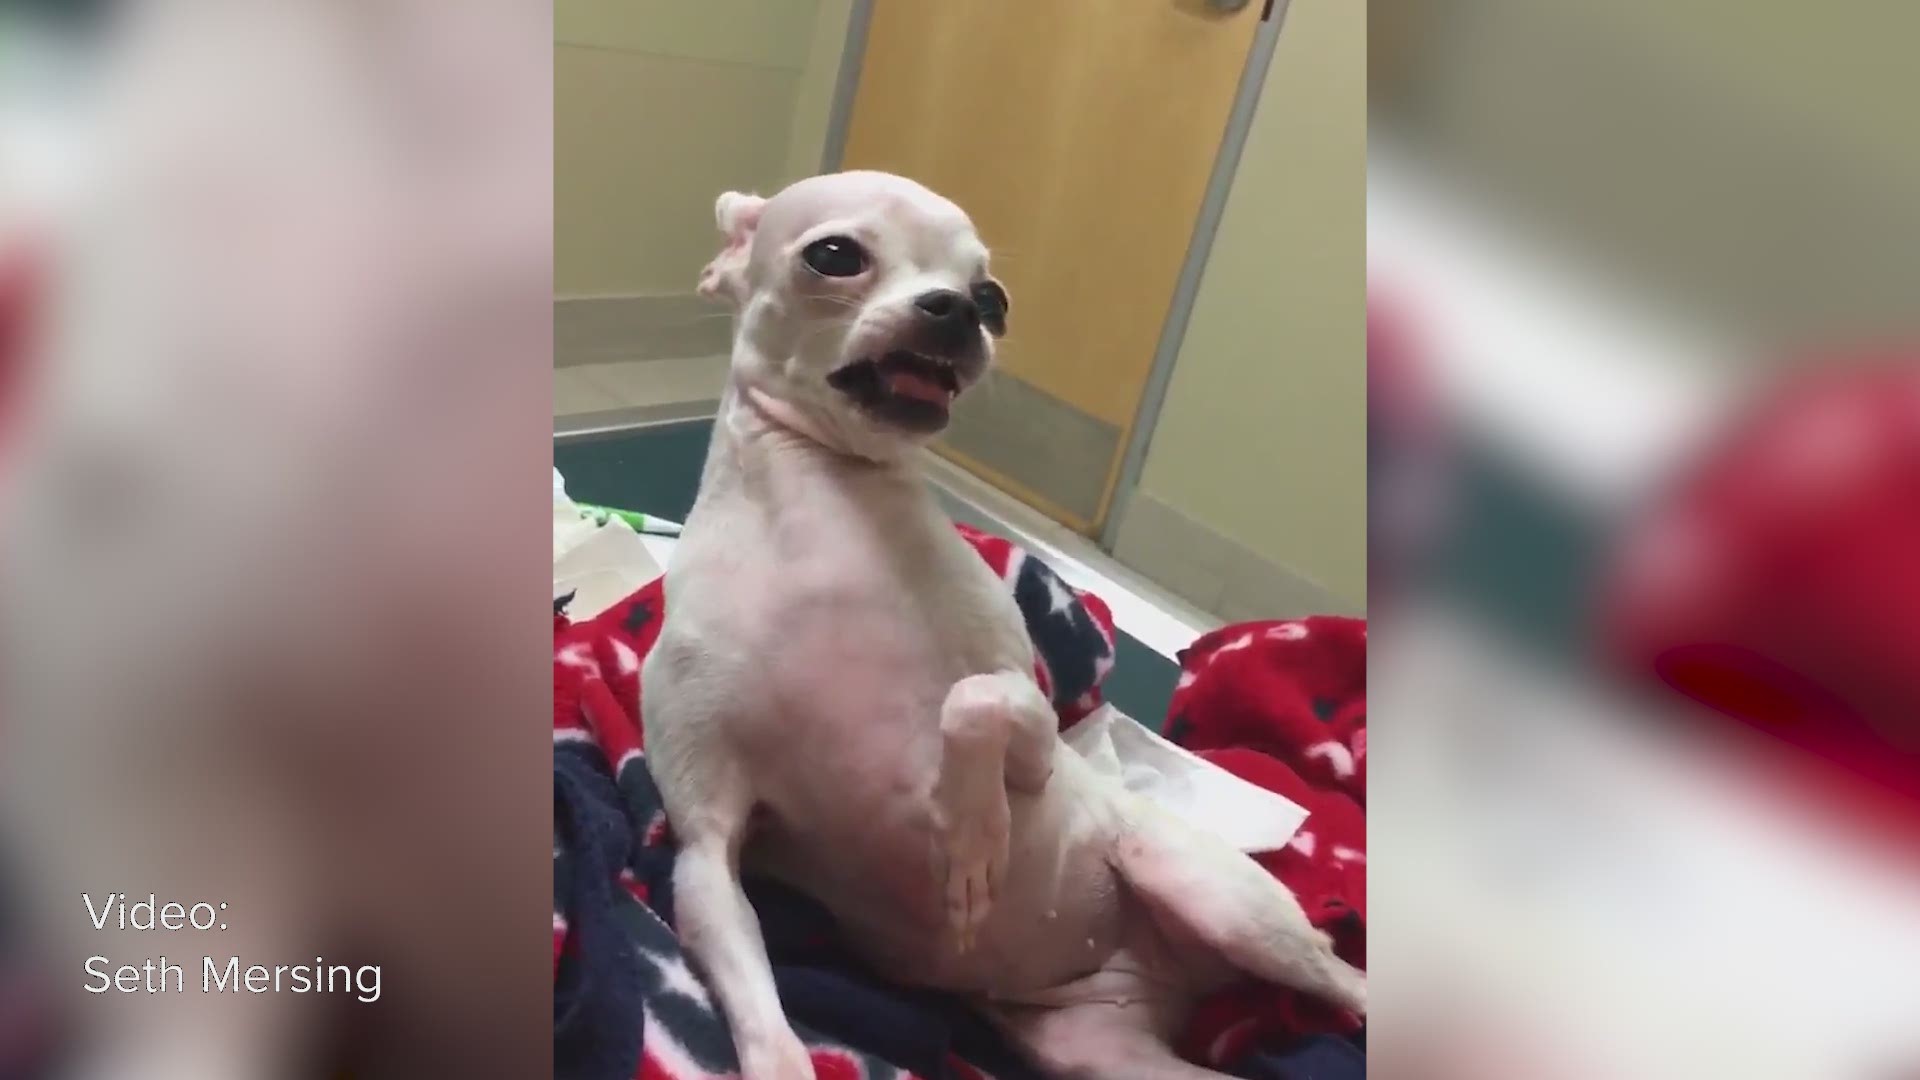 A South Texas teen's video of his Chihuahua's reaction after ingesting some kind of marijuana item during a walk in the park has been making the rounds on social media.